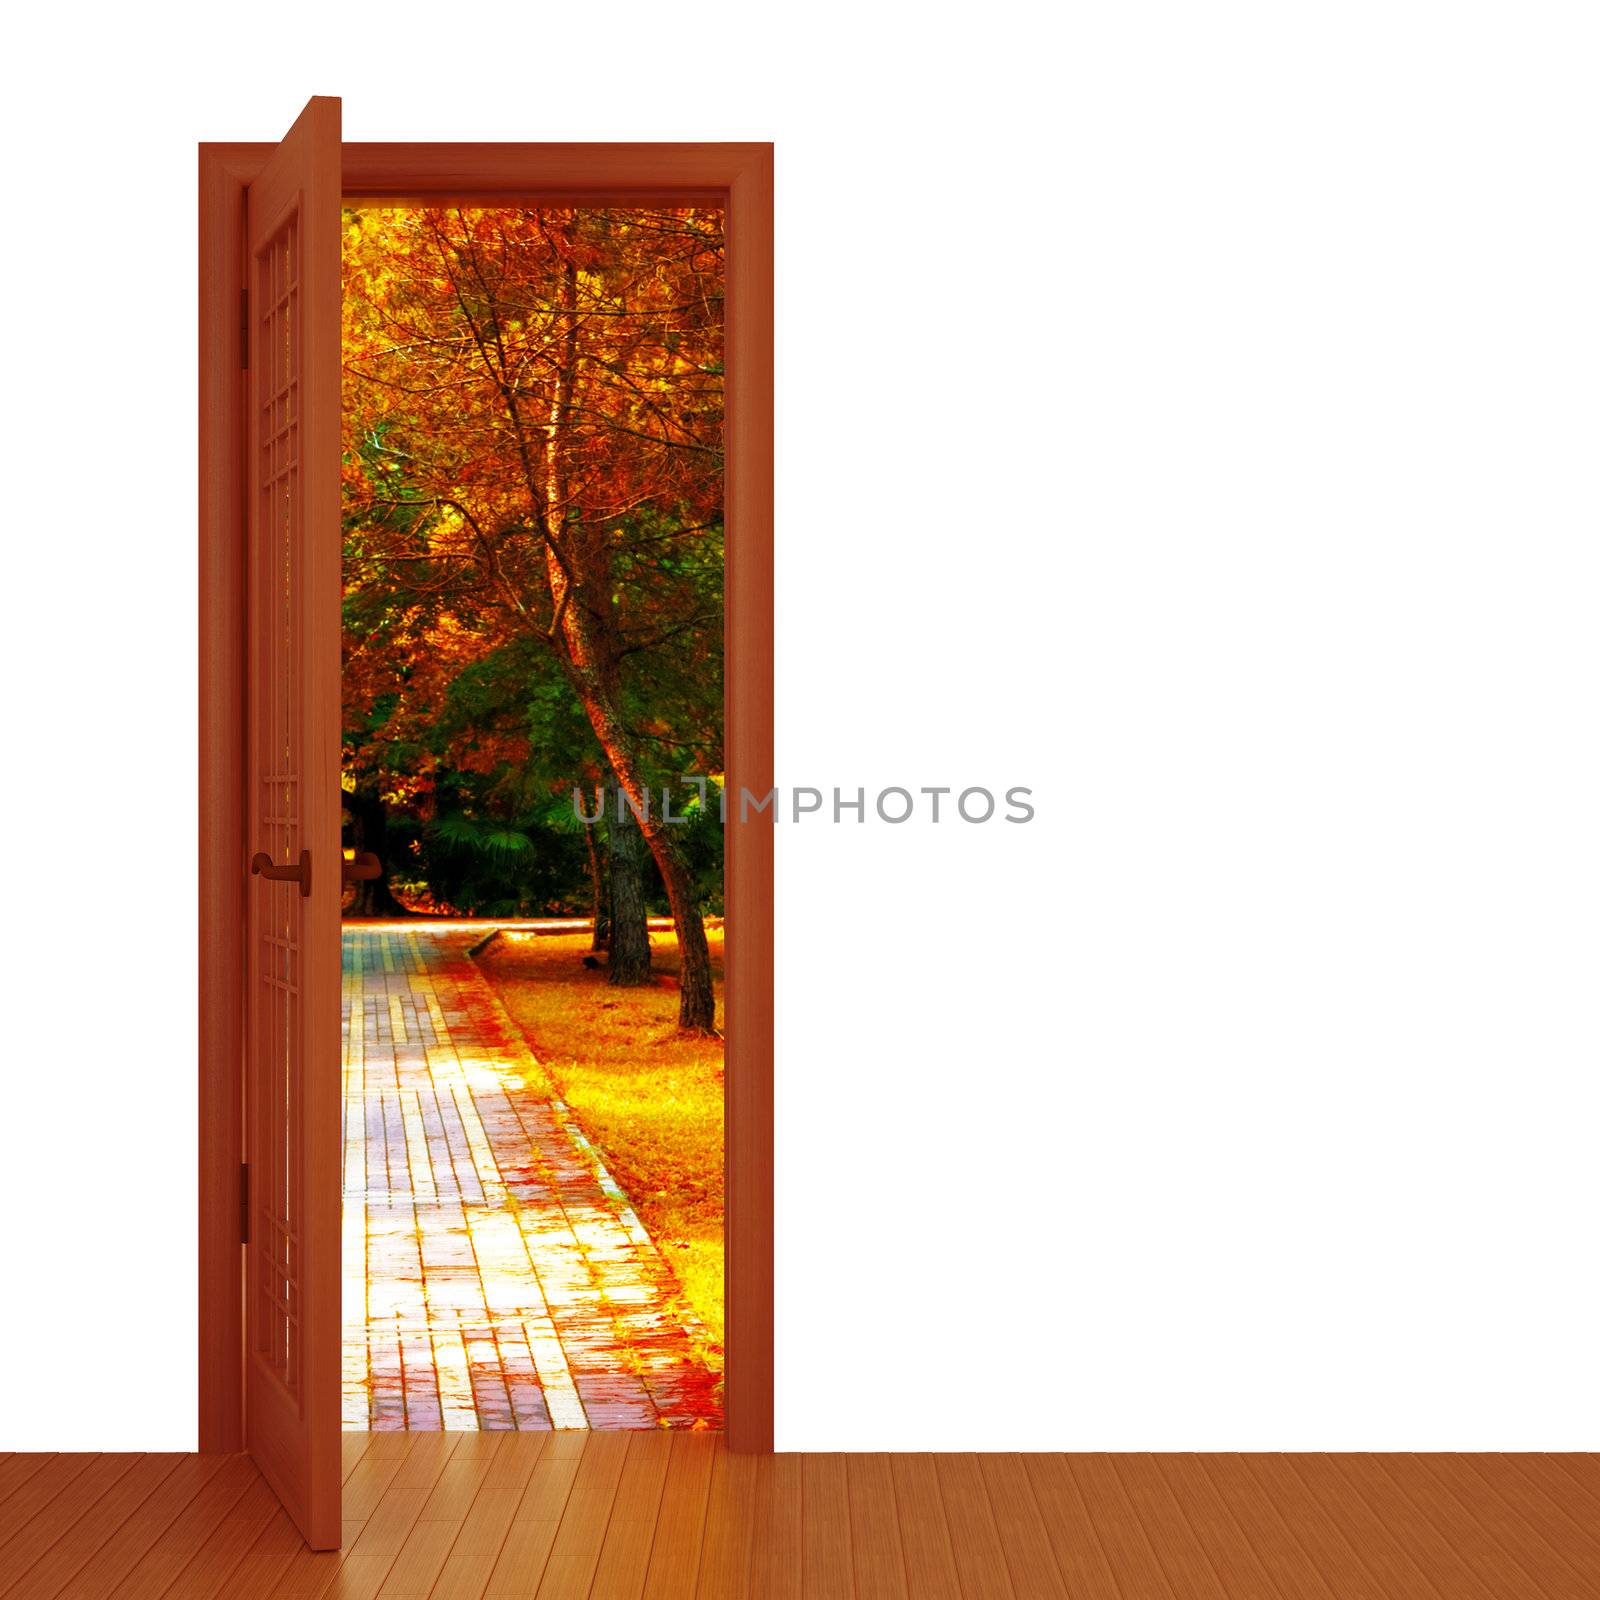 unclosed door and beautiful autumn landscape by Serp